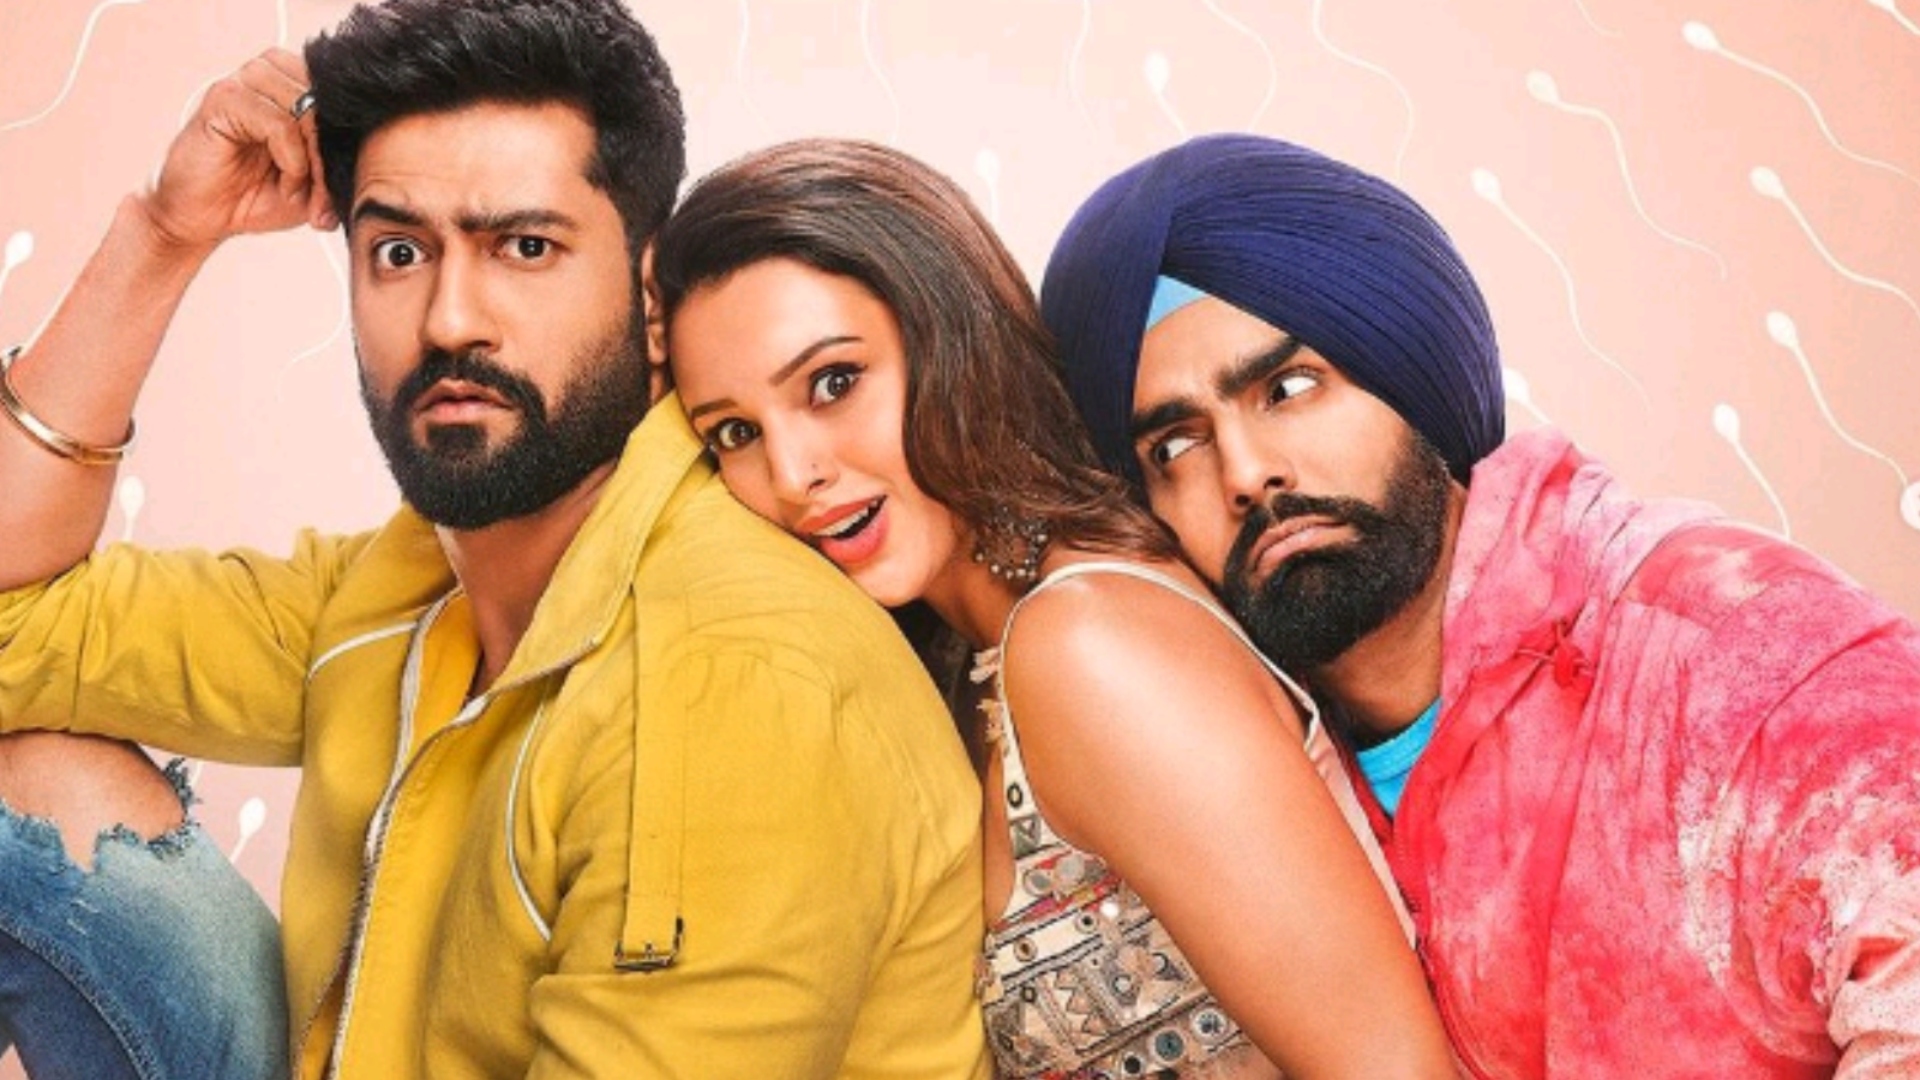 ‘Bad Newz’ Box Office Collection Update: Vicky Kaushal’s Film Crosses Rs 40 Crore Mark In 6 Days